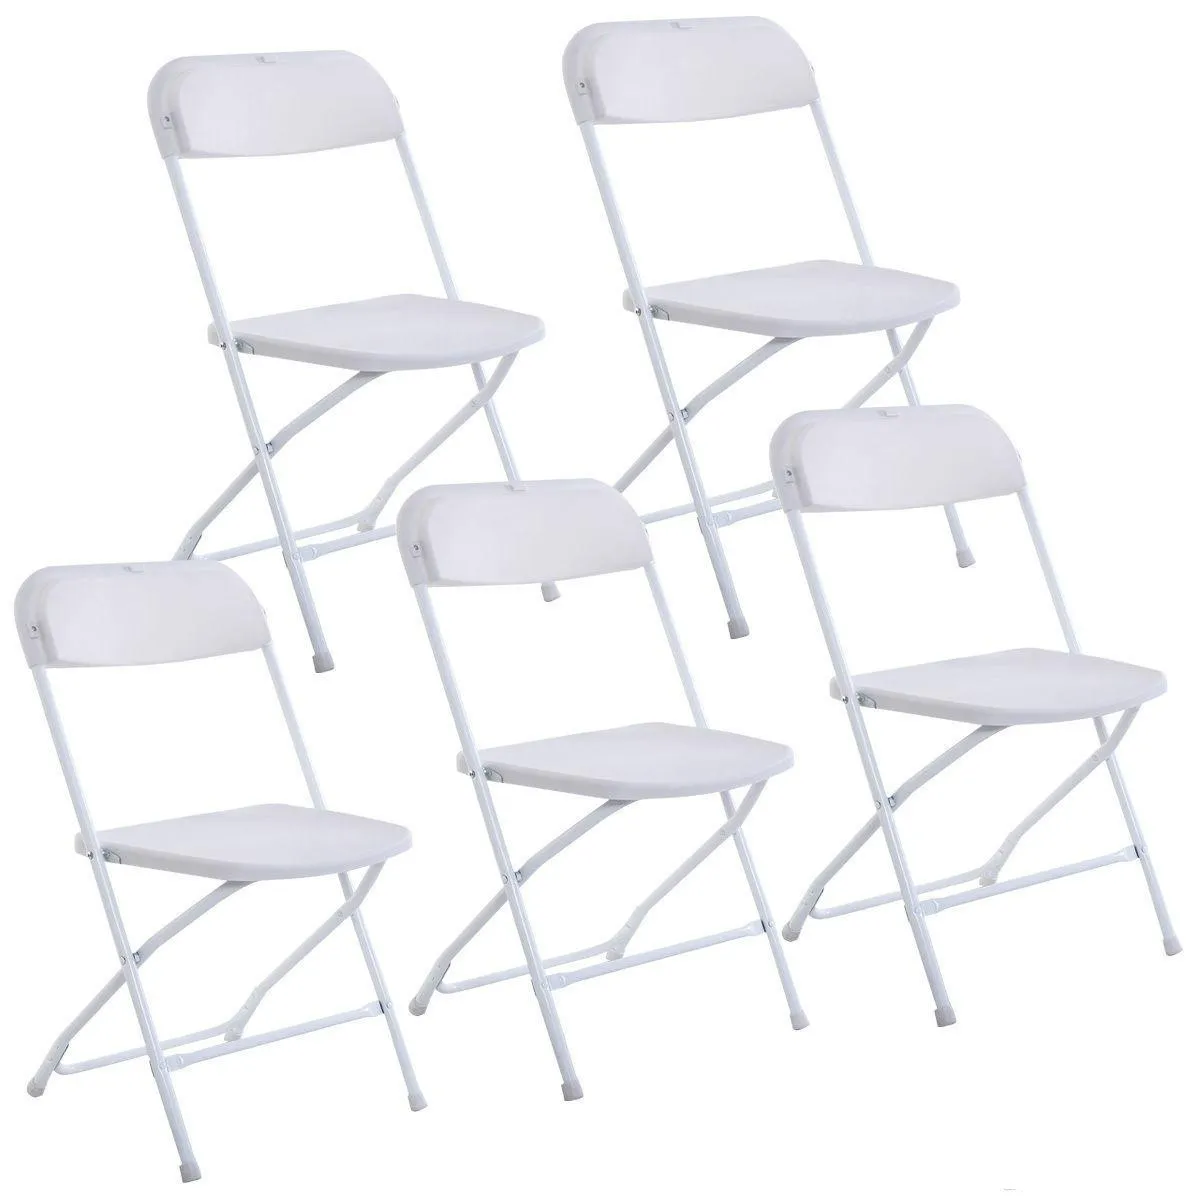 New Plastic Folding Chairs Wedding Party Event Chair Commercial White